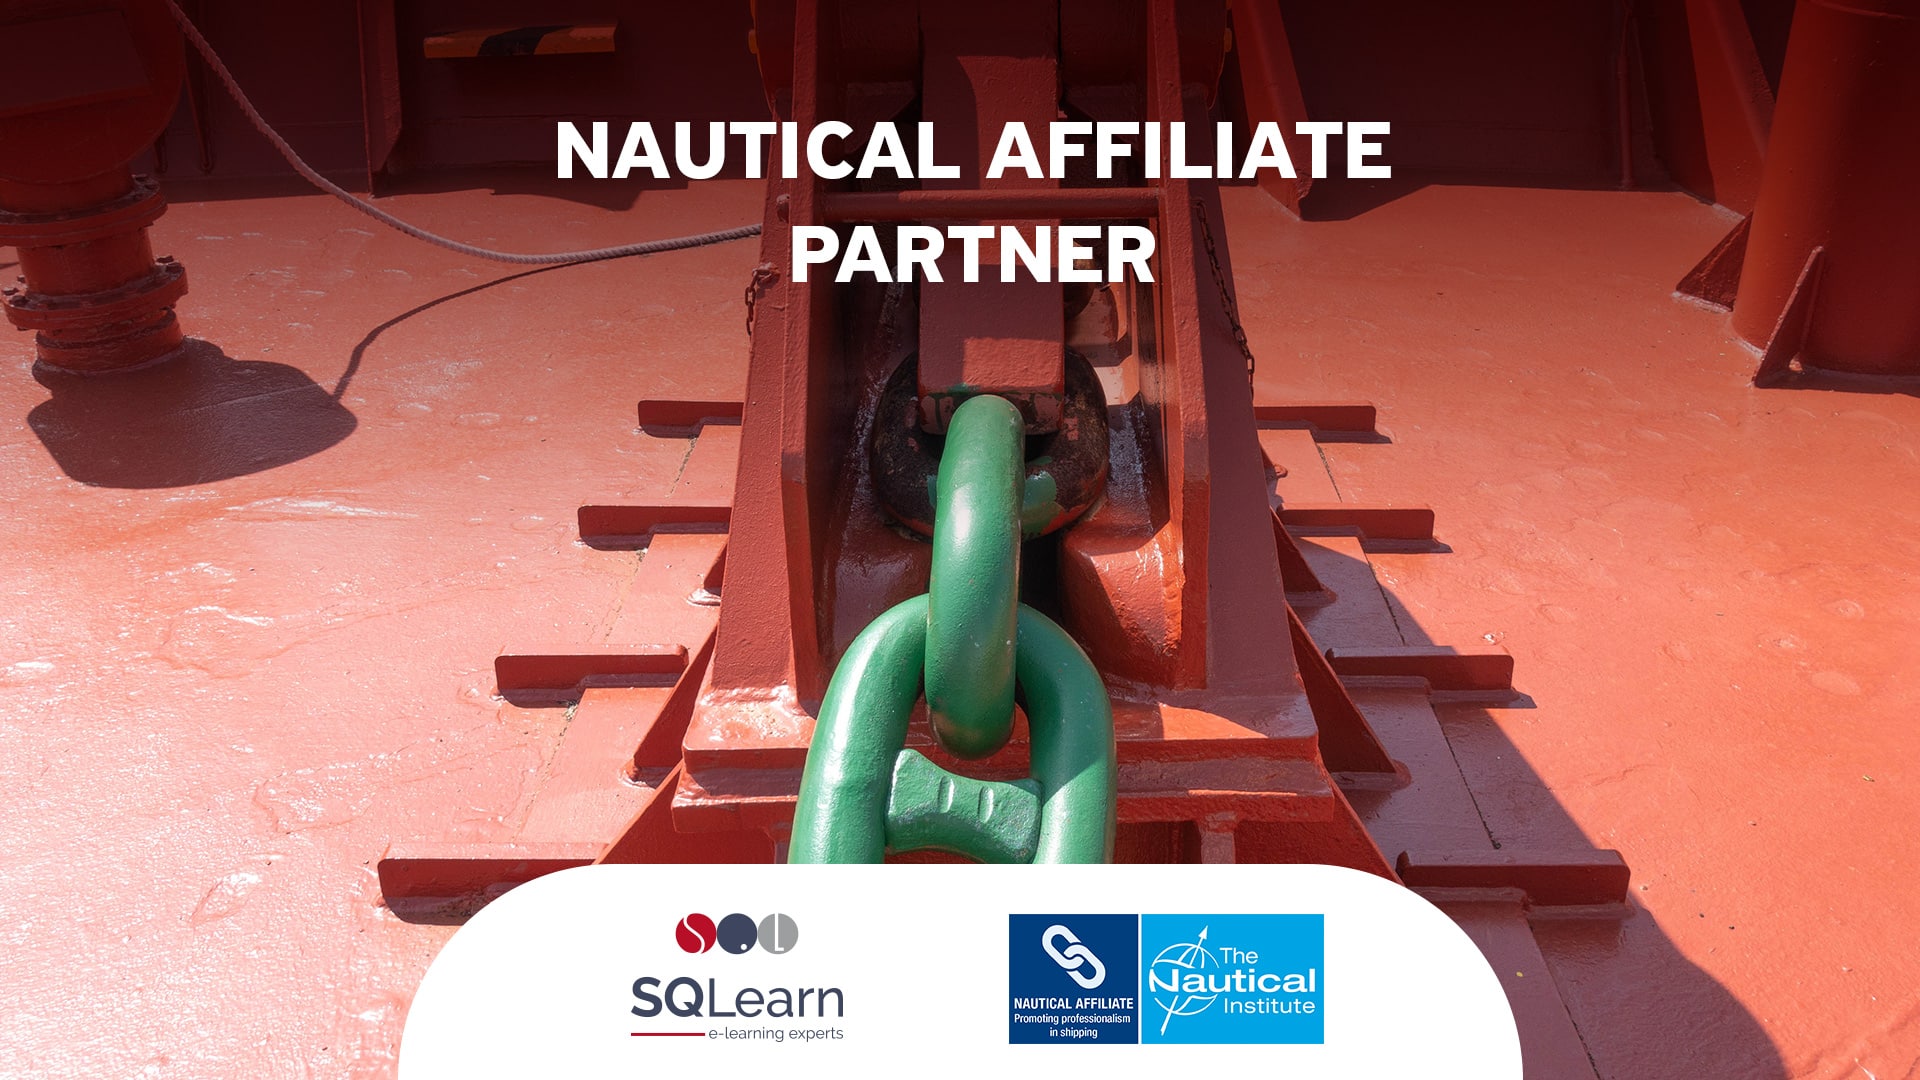 SQLearn becomes a Nautical Affiliate partner of the Nautical Institute